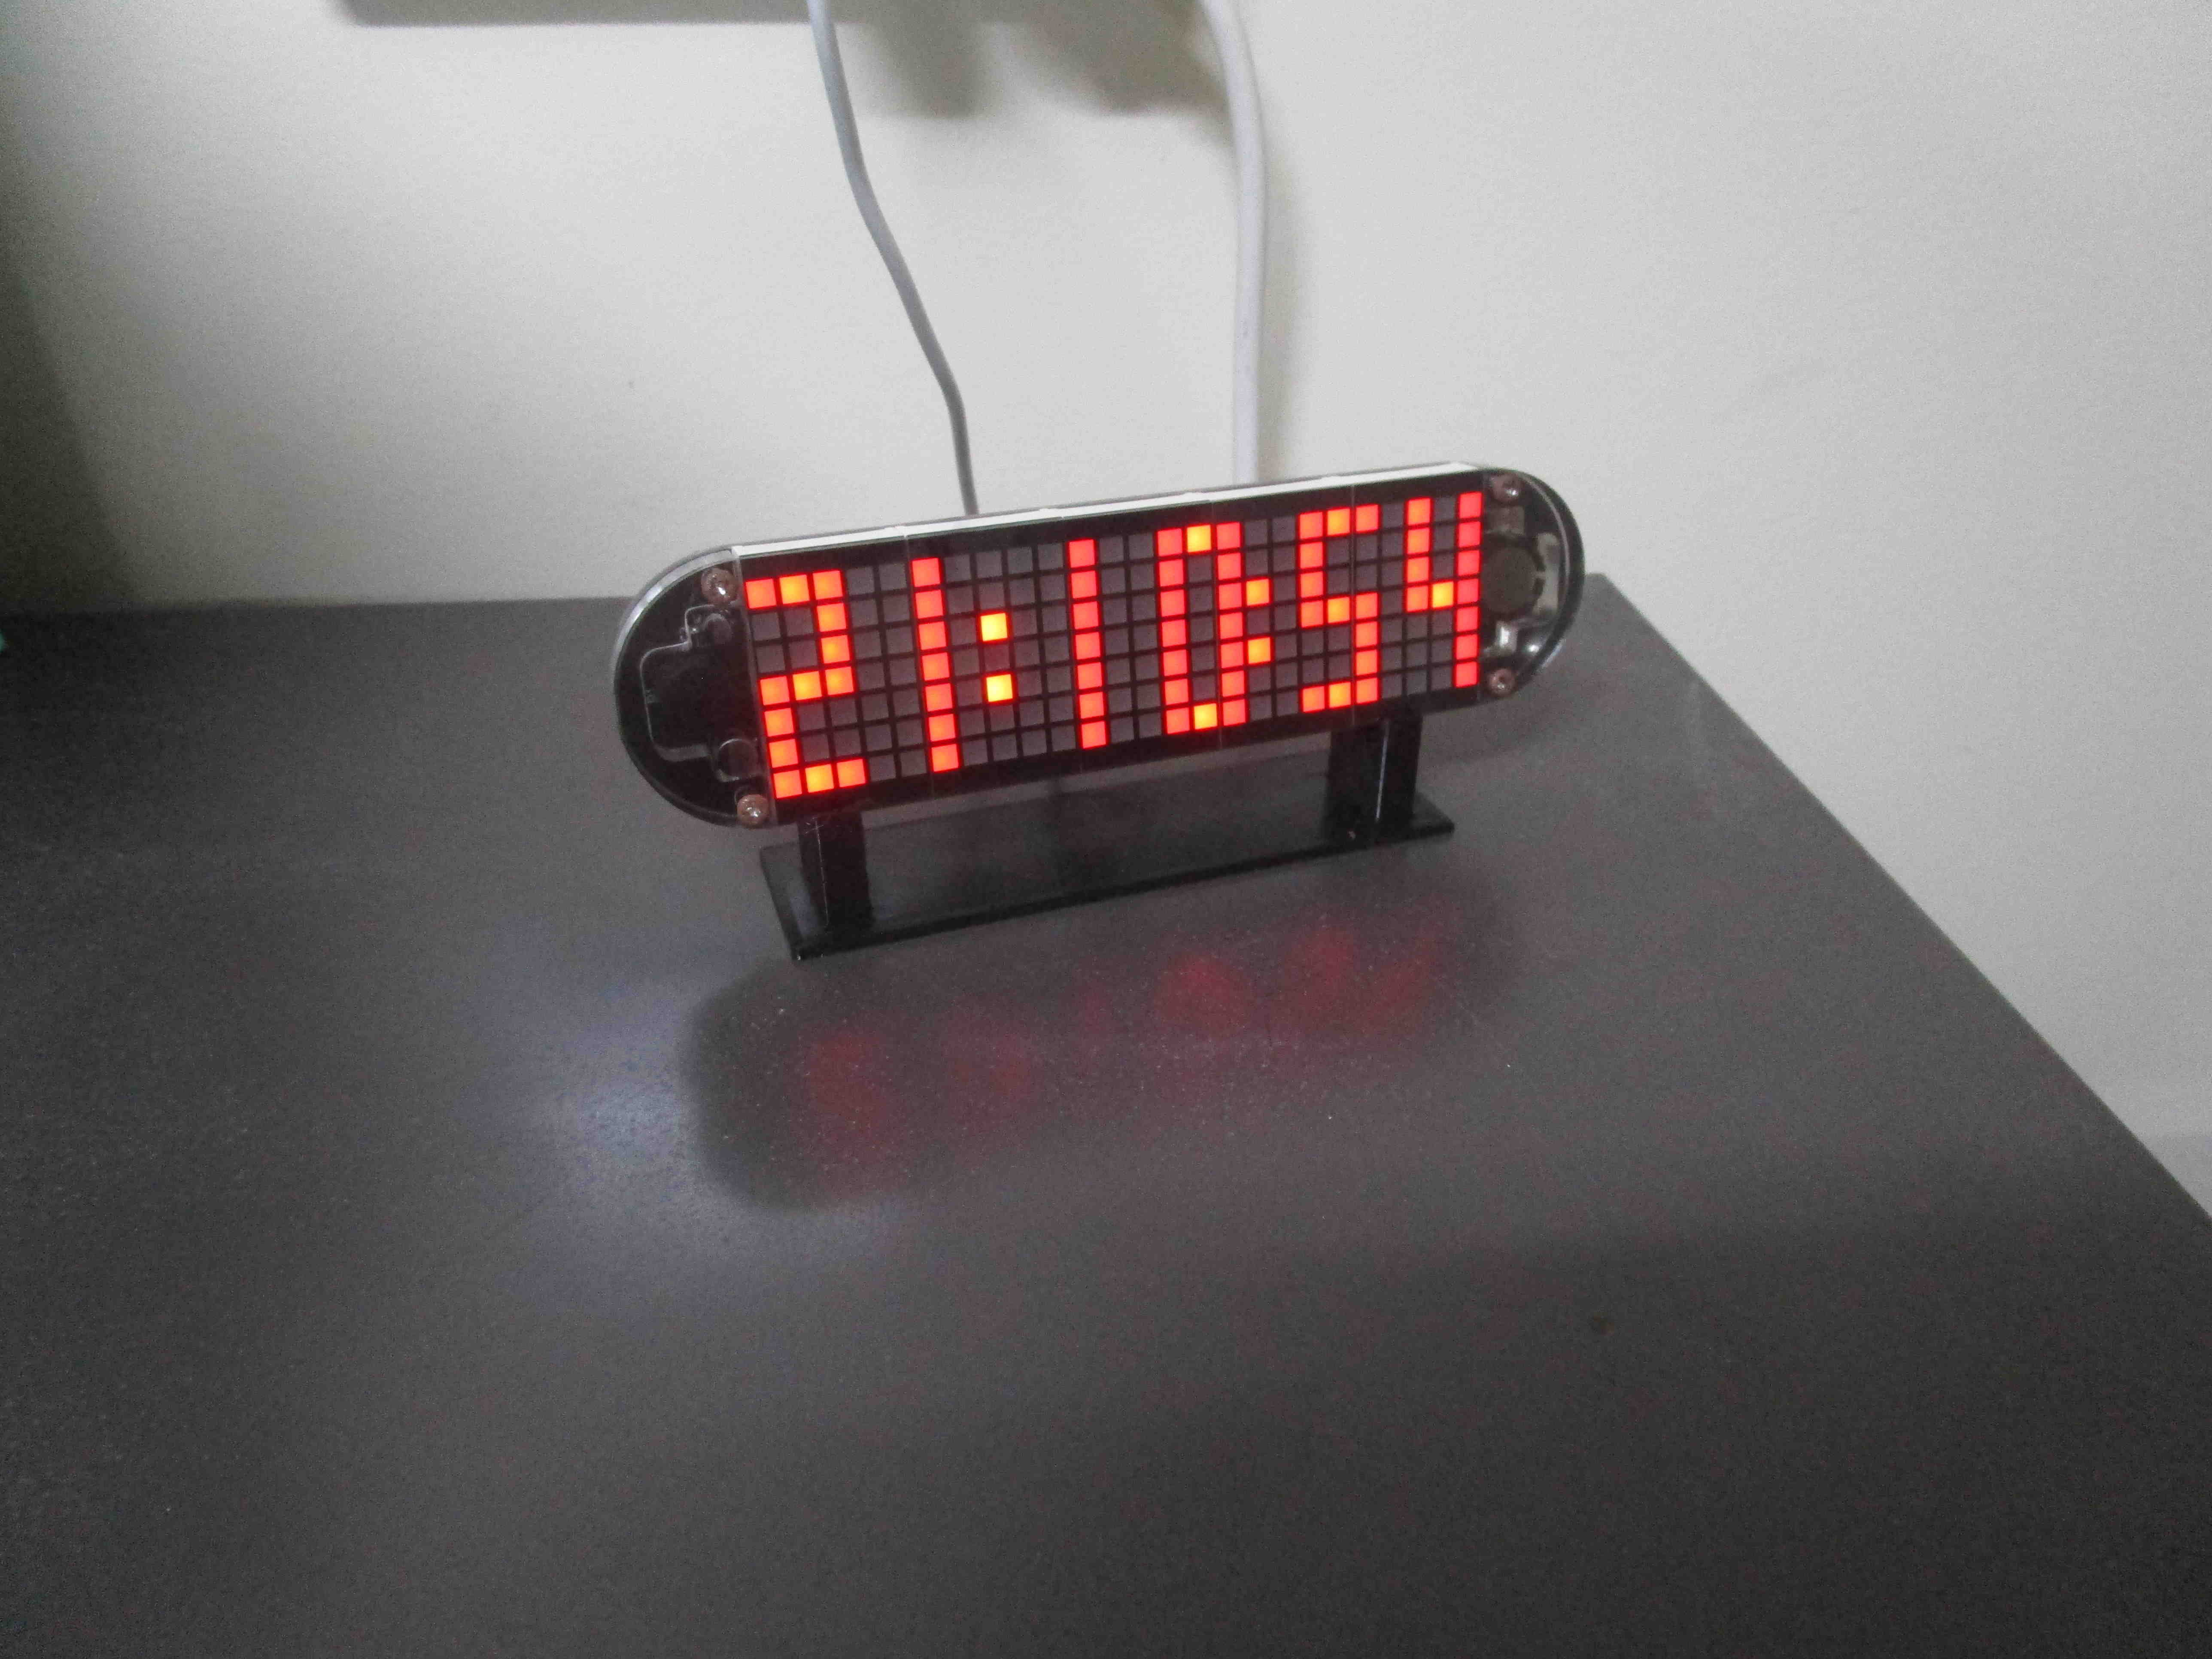 Desk Stand for LED Geekcreit Clock Kit